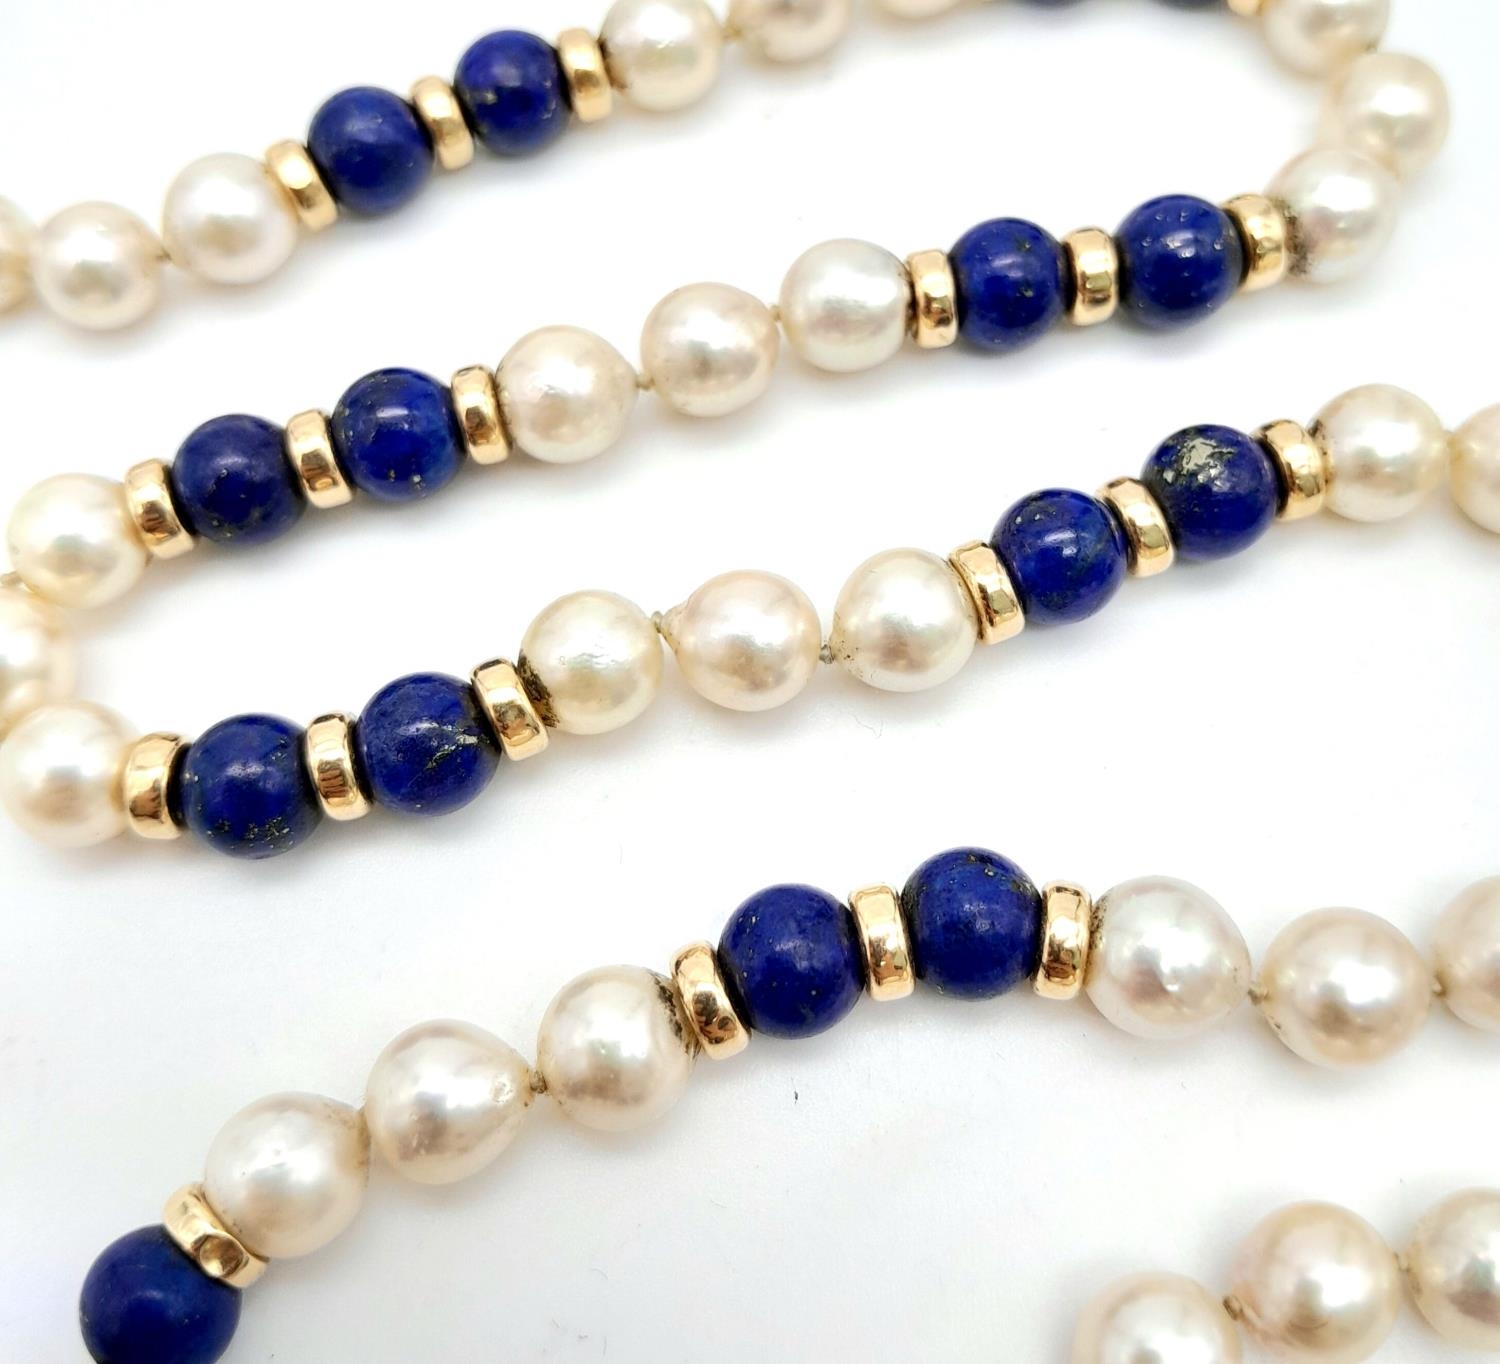 A Lapis and Pearl Necklace with 14K Gold Spacers and Clasp. 68cm - Image 4 of 6